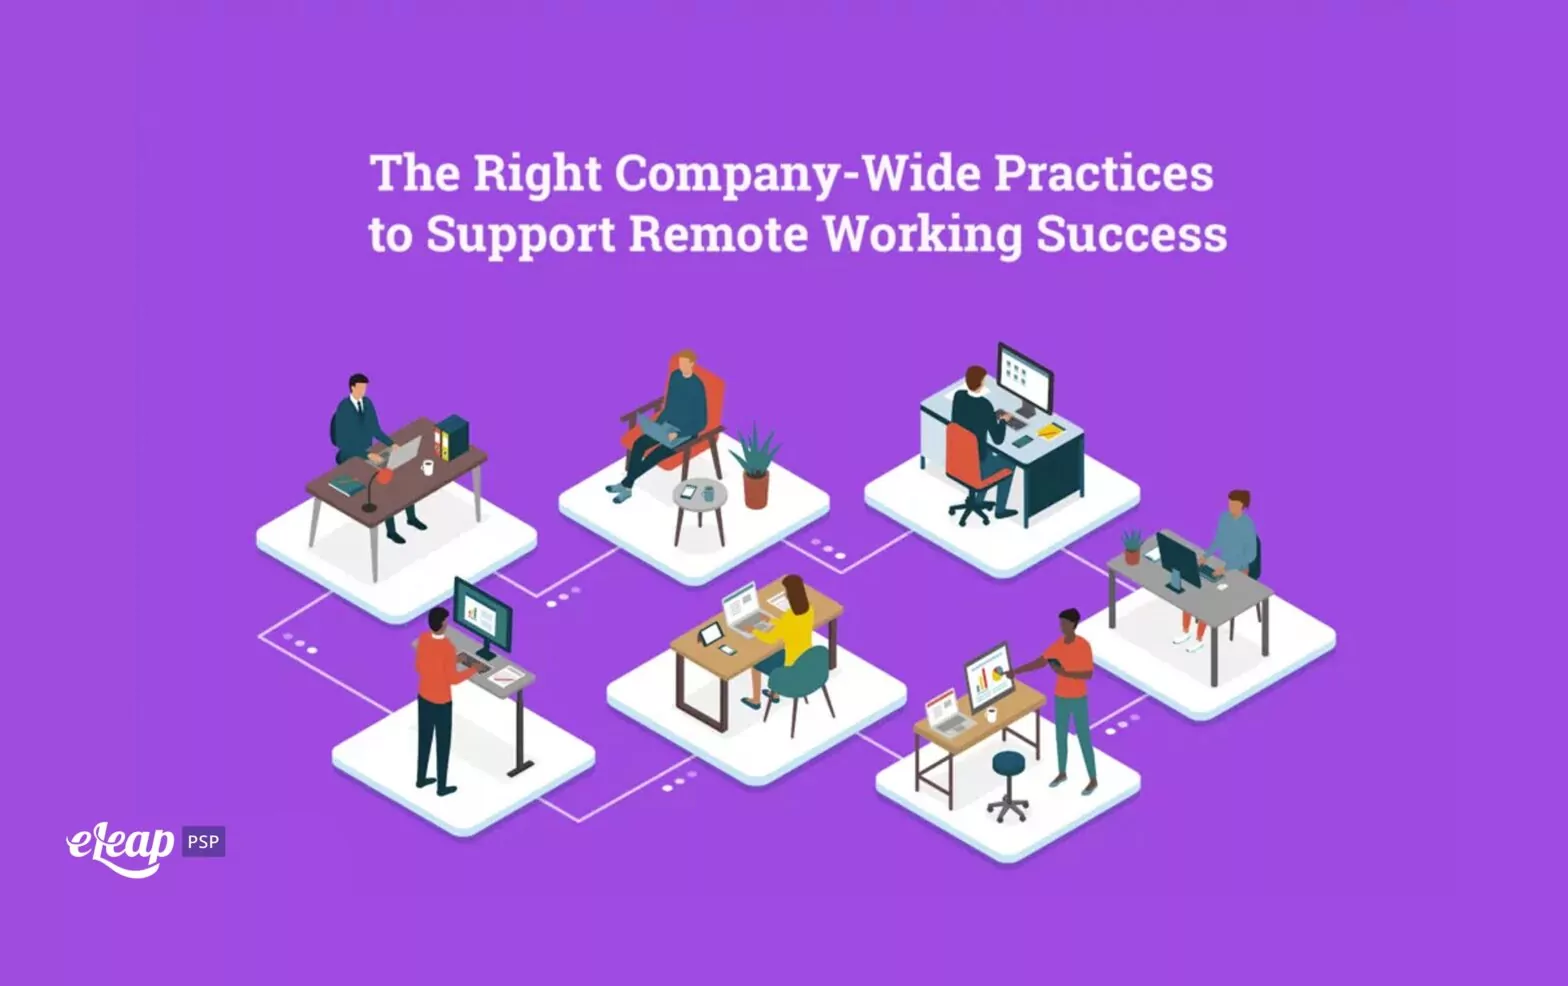 The Right Company-Wide Practices to Support Remote Working Success